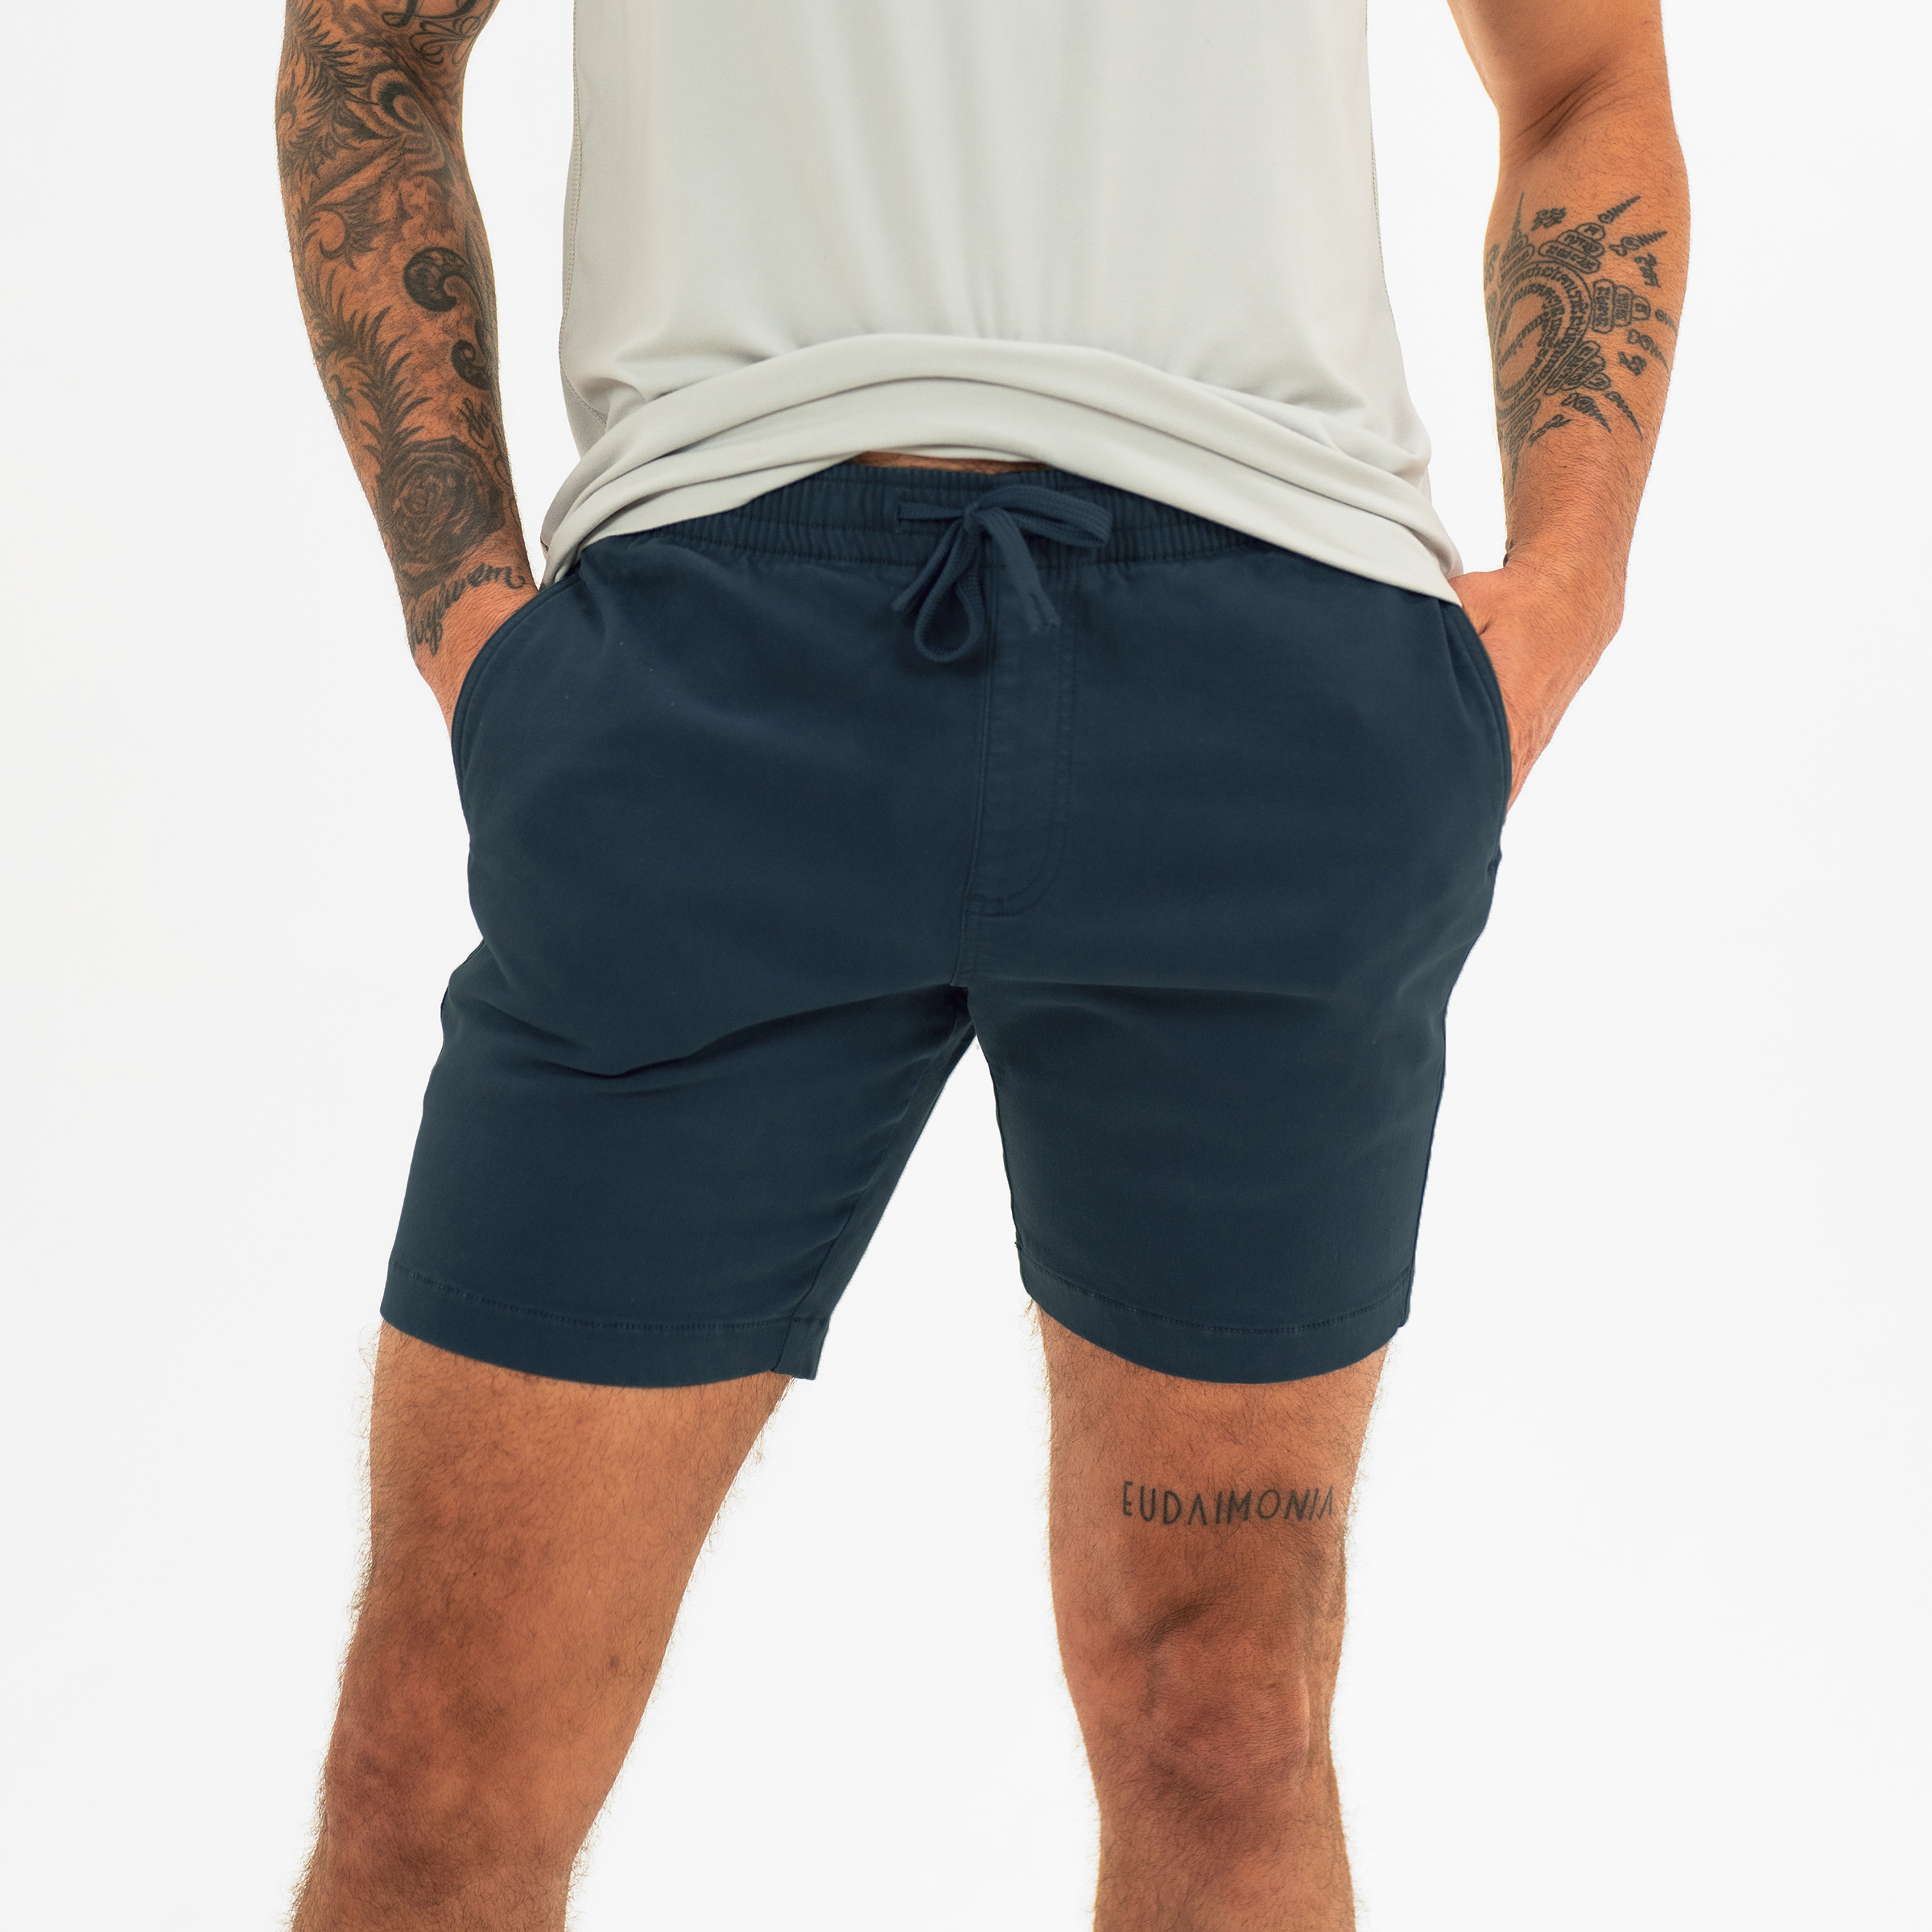 Alto Short 7" inseam in Navy front on model with elastic waistband, fabric drawstring, faux fly, and two front side seam pockets